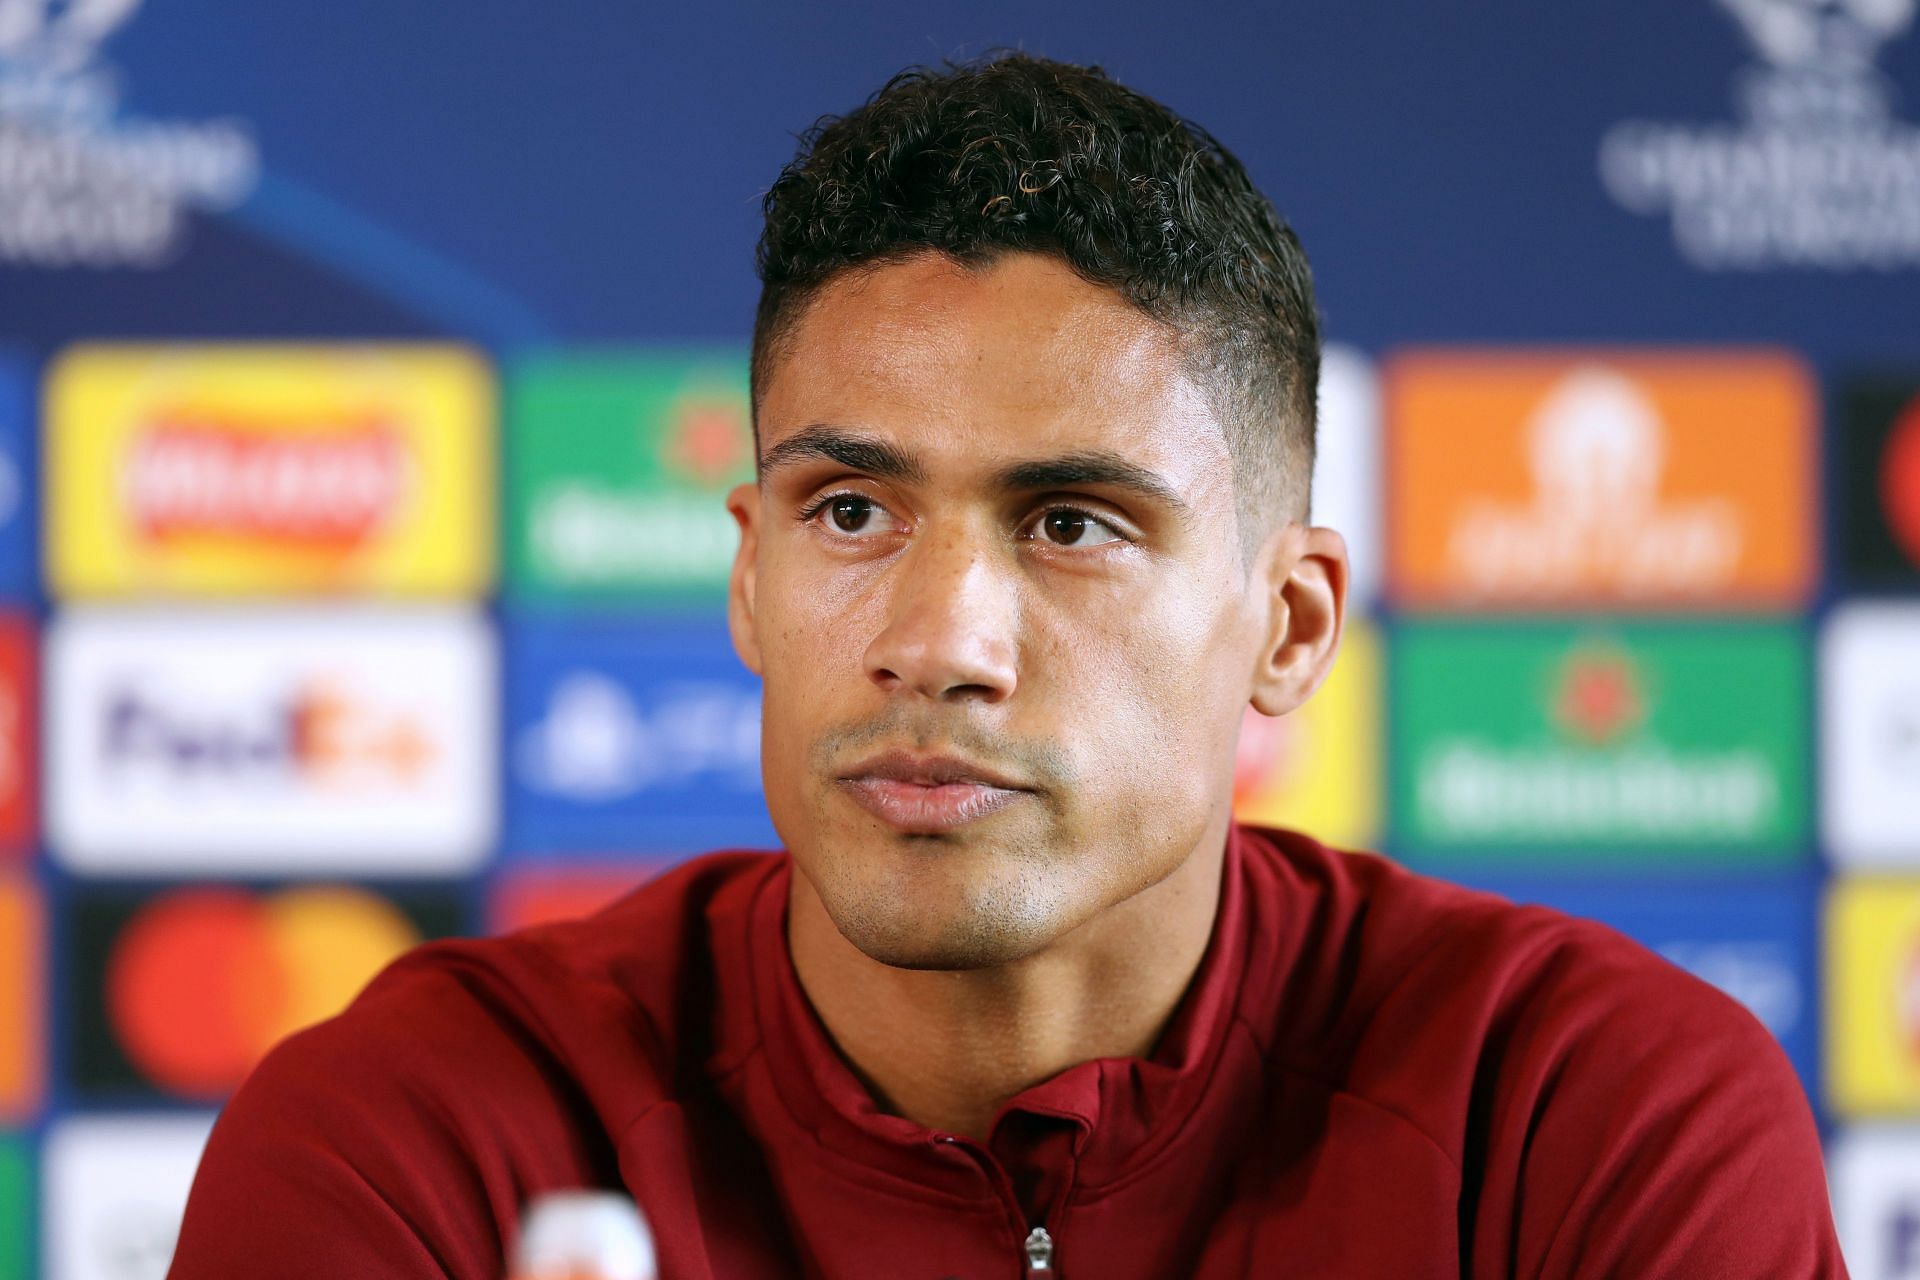 Raphael Varane has struggled with fitness issues at Old Trafford.